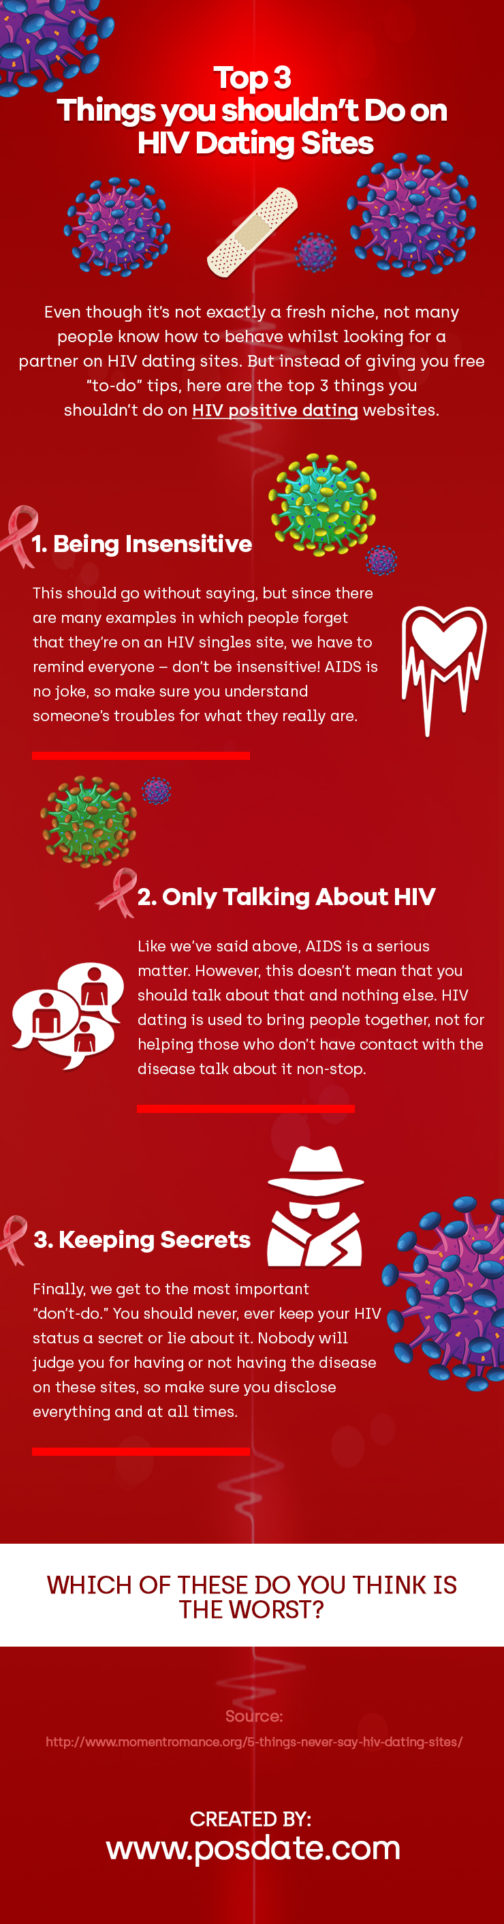 Top 3 Things You Shouldn’t Do On HIV Dating Sites